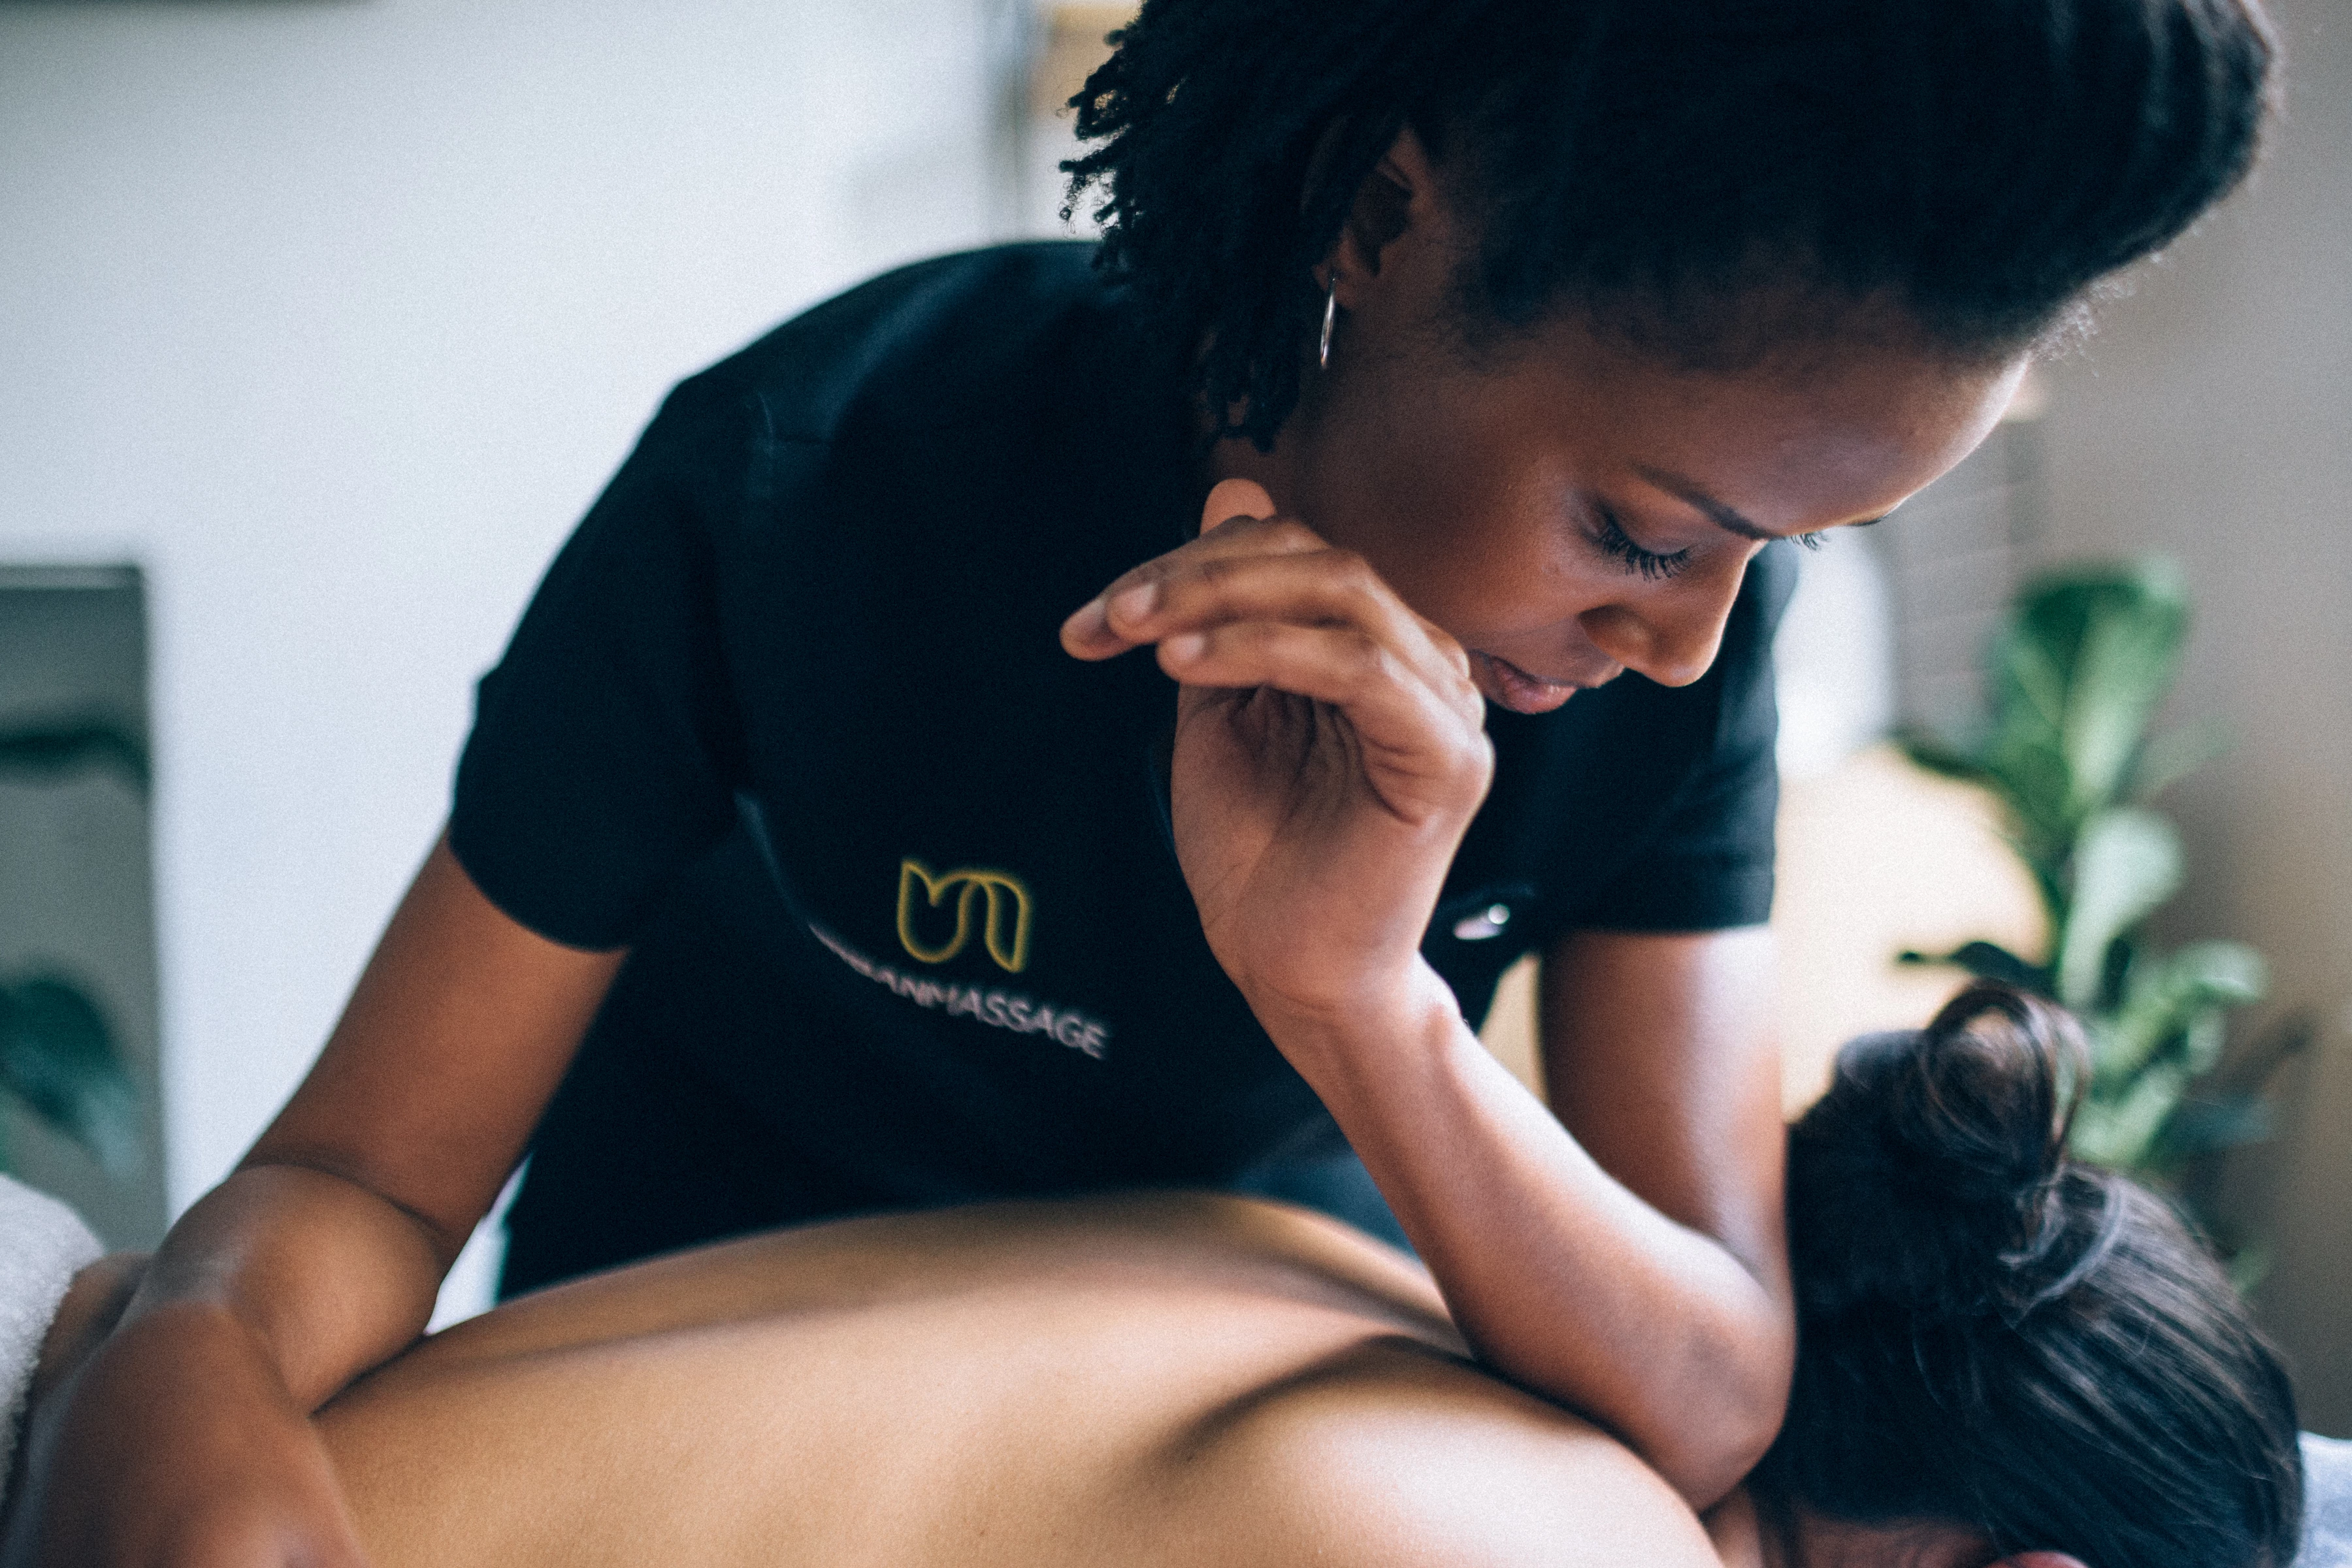 Urban Massage launched in 2014